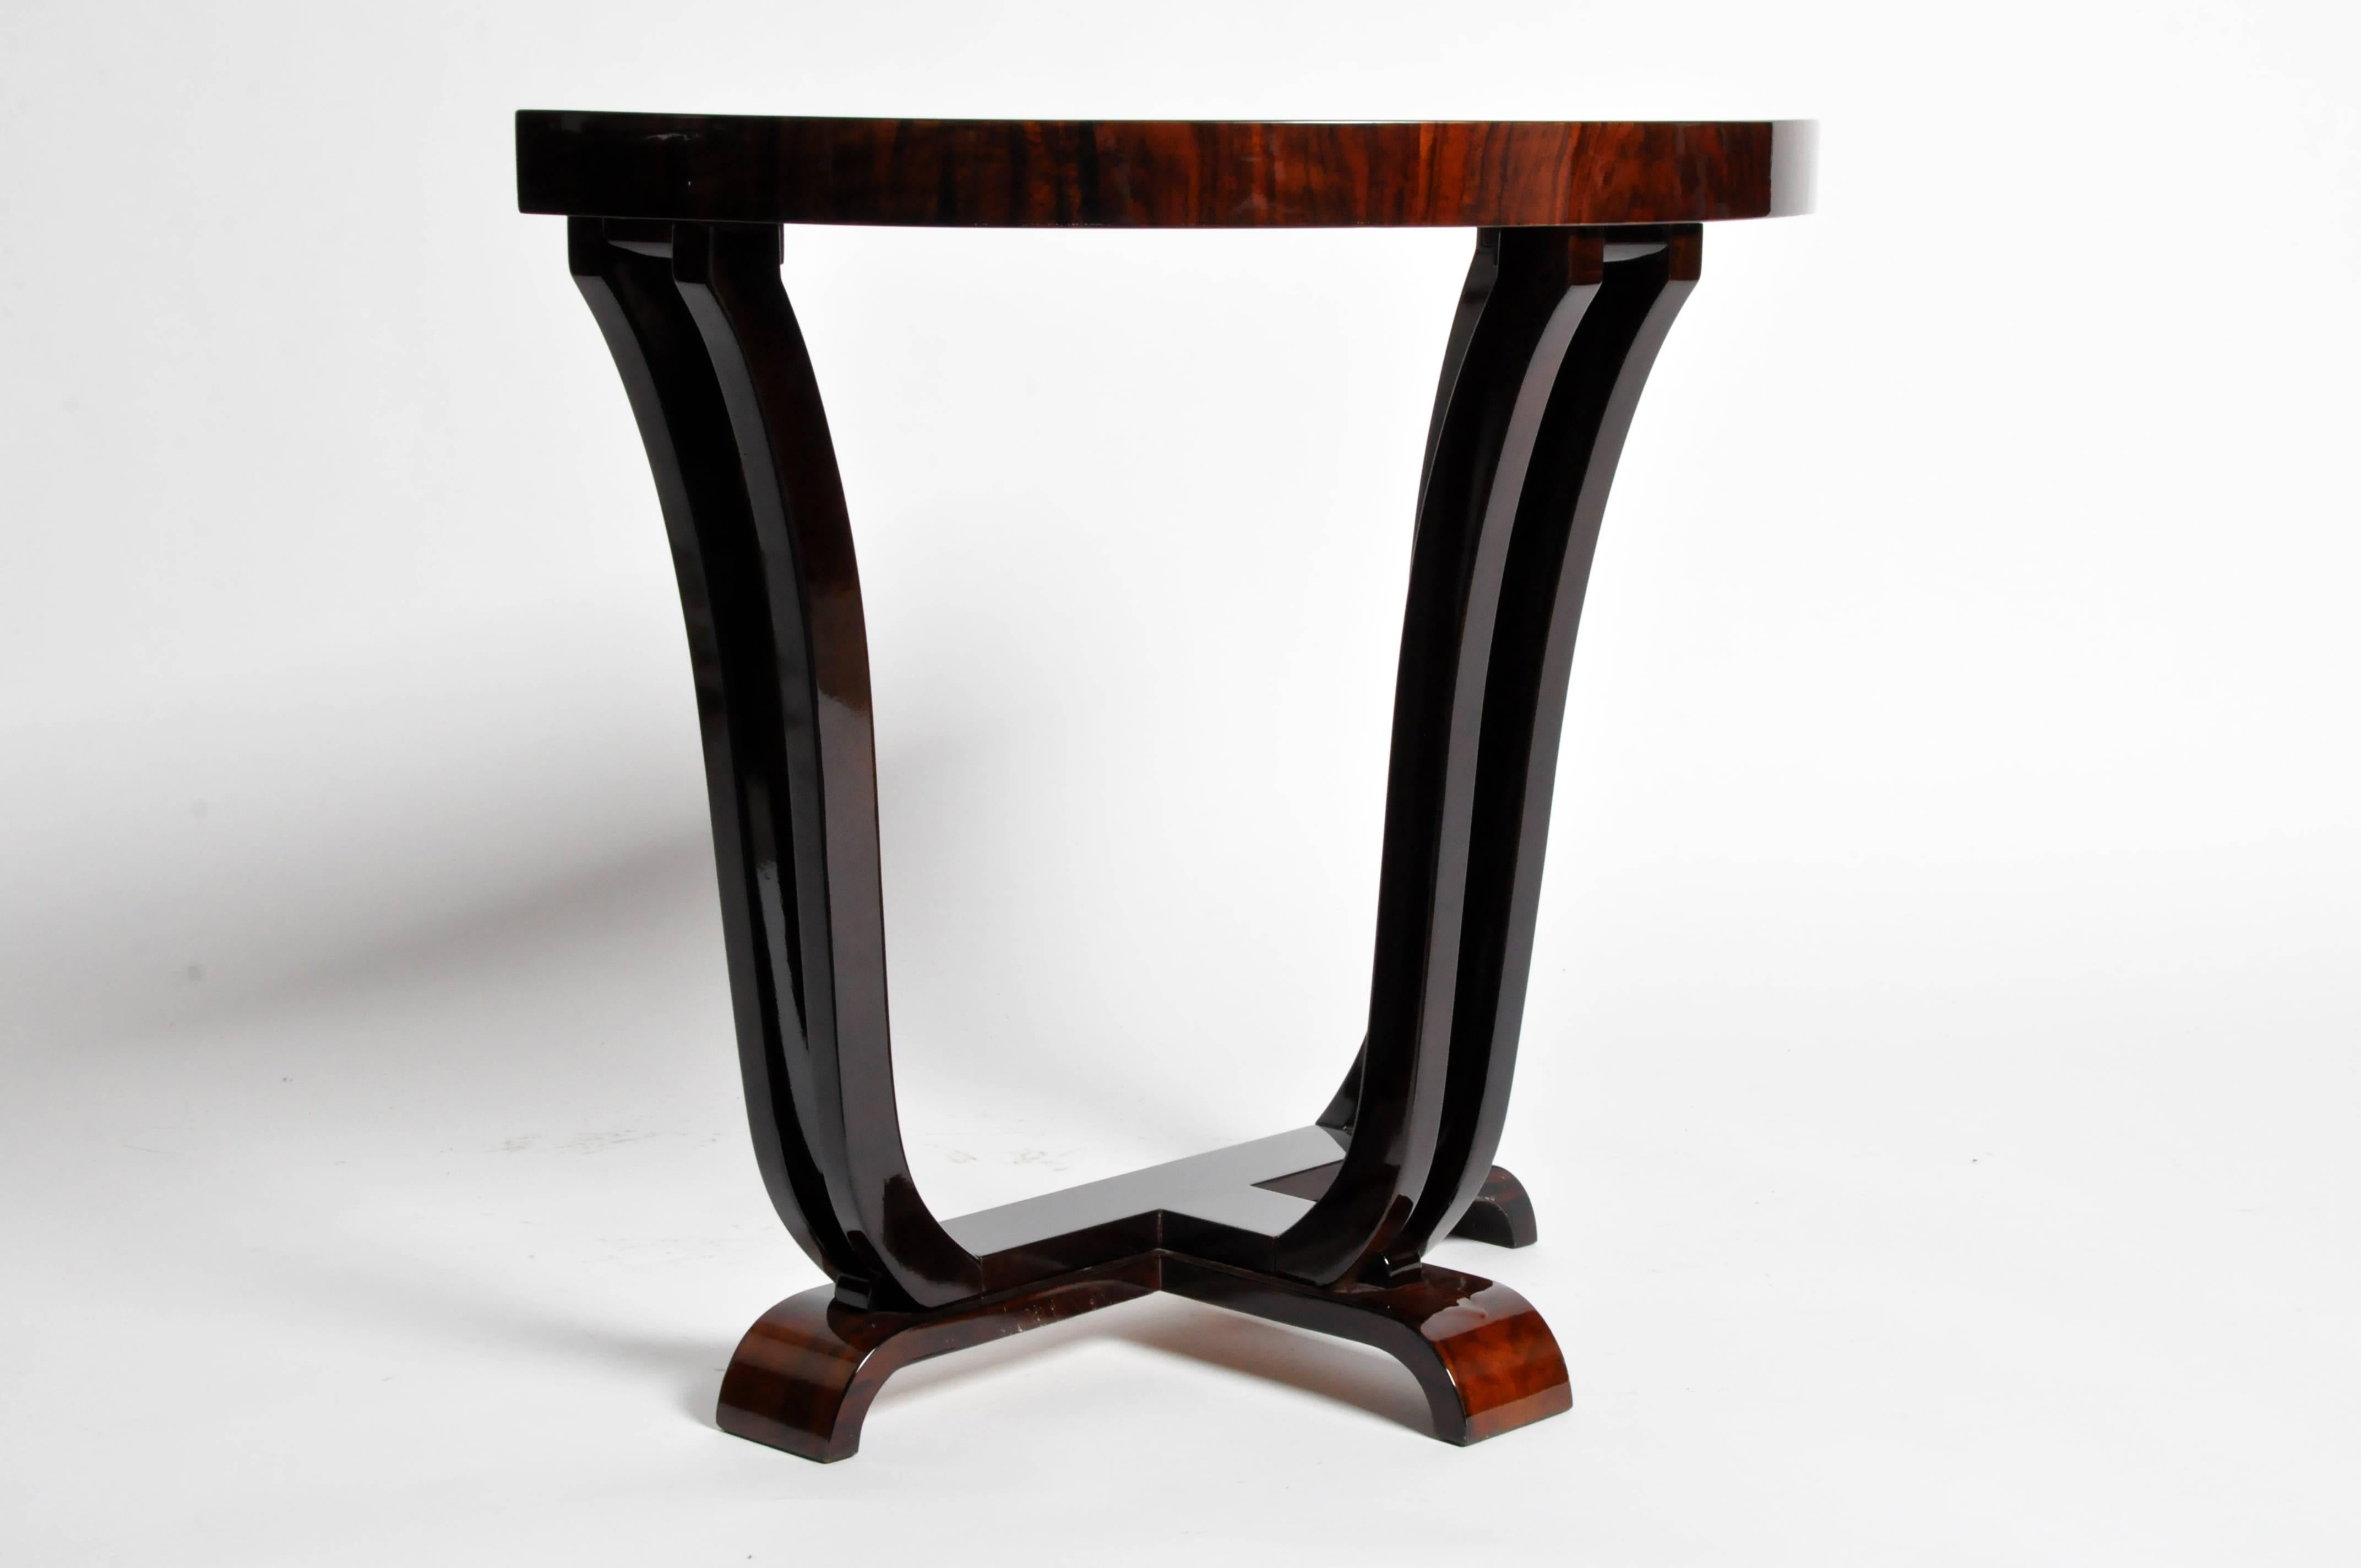 This gorgeous newly made Art Deco style half-round console is from Hungary and is made from walnut veneer. This piece has beautiful clean lines and is a great piece to accent any room.